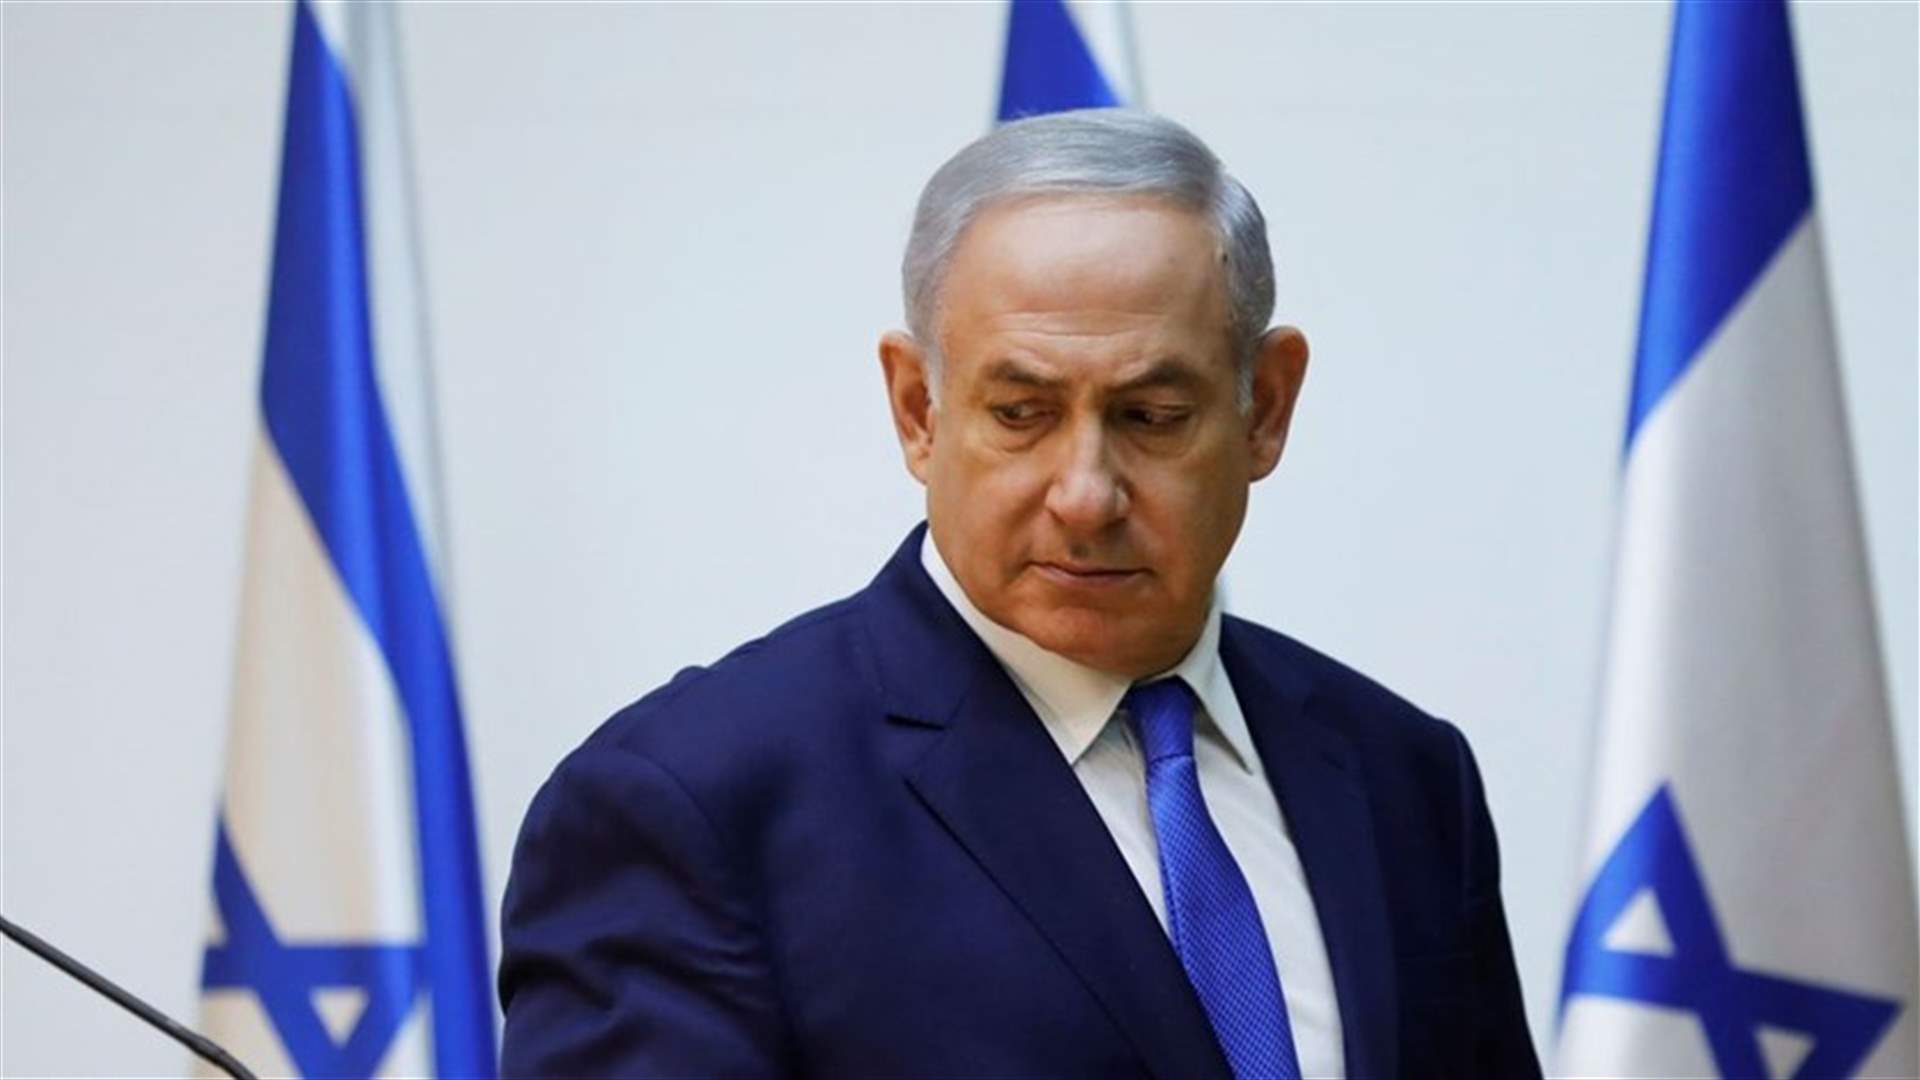 Israel to escalate fight against Iran in Syria after US exit -Netanyahu